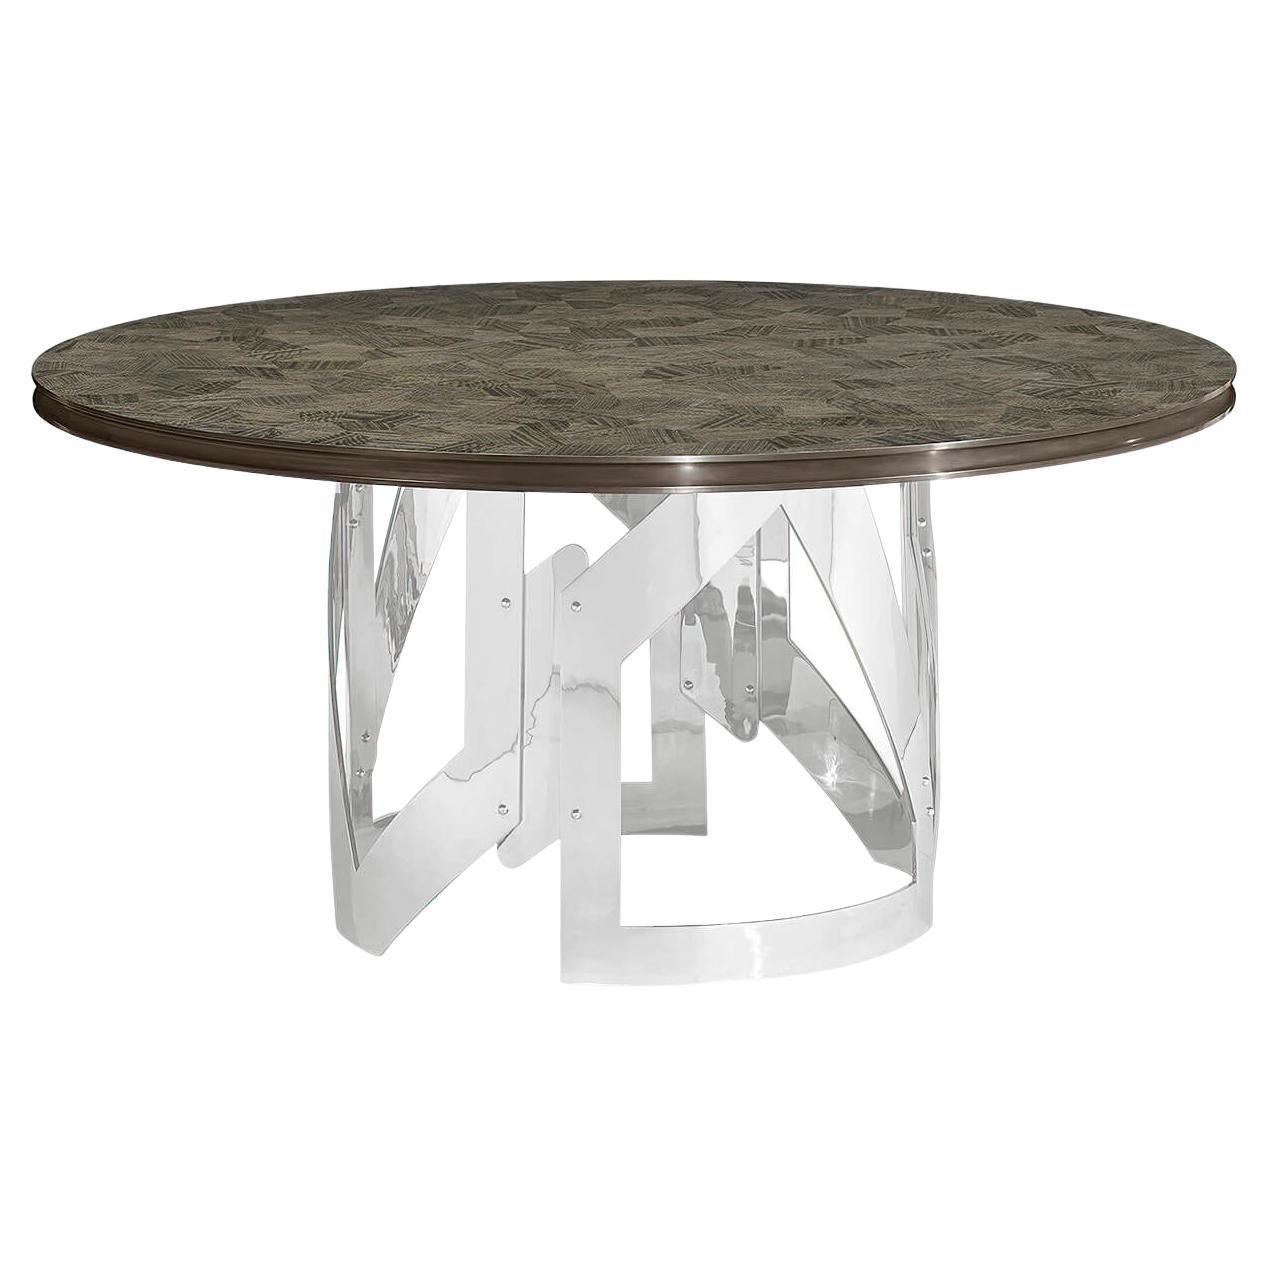 Gatsby Art Deco Dining Table For Sale